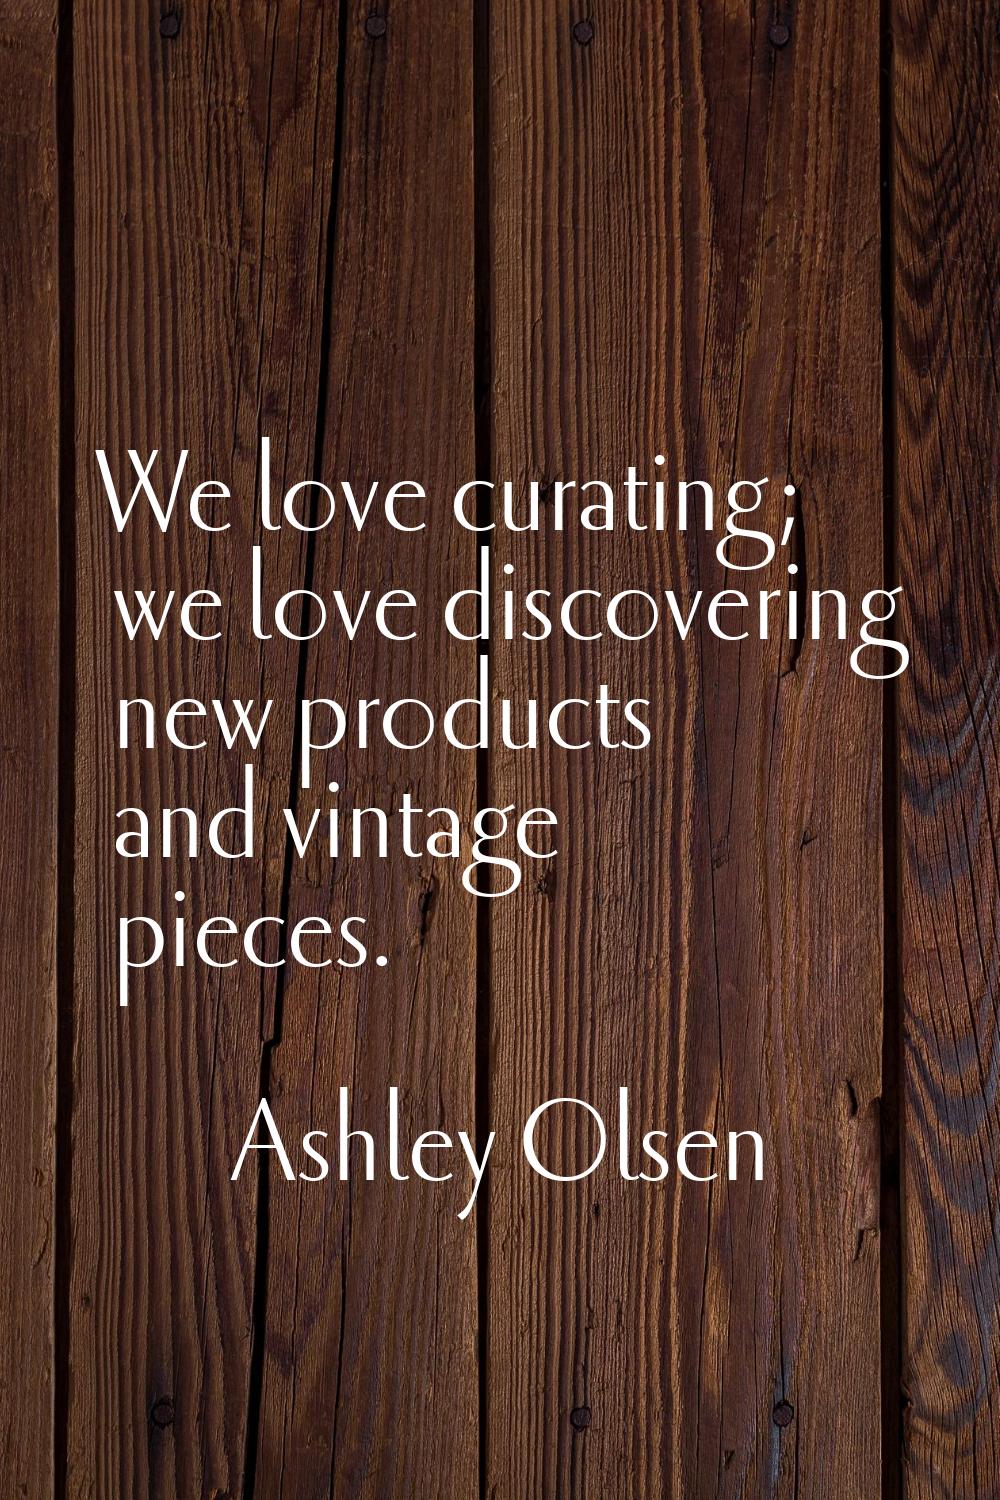 We love curating; we love discovering new products and vintage pieces.